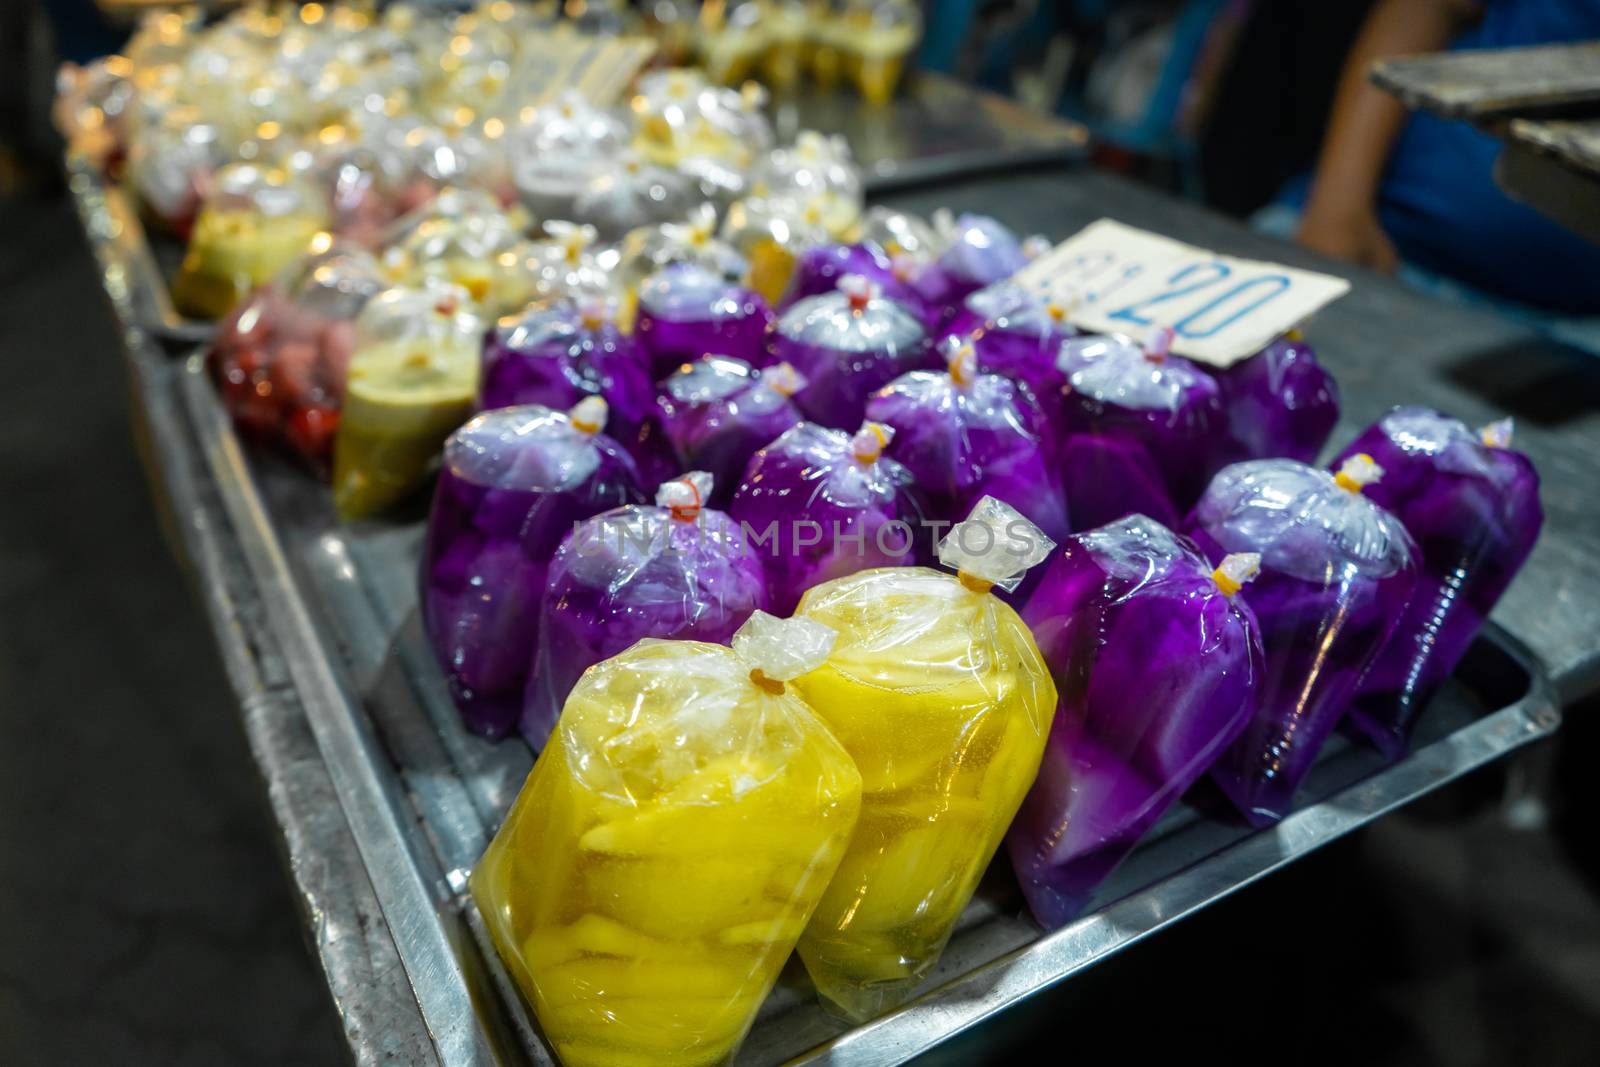 Colored desserts in plastic bags at a street food market in Asia. Unusual Asian food. by Try_my_best